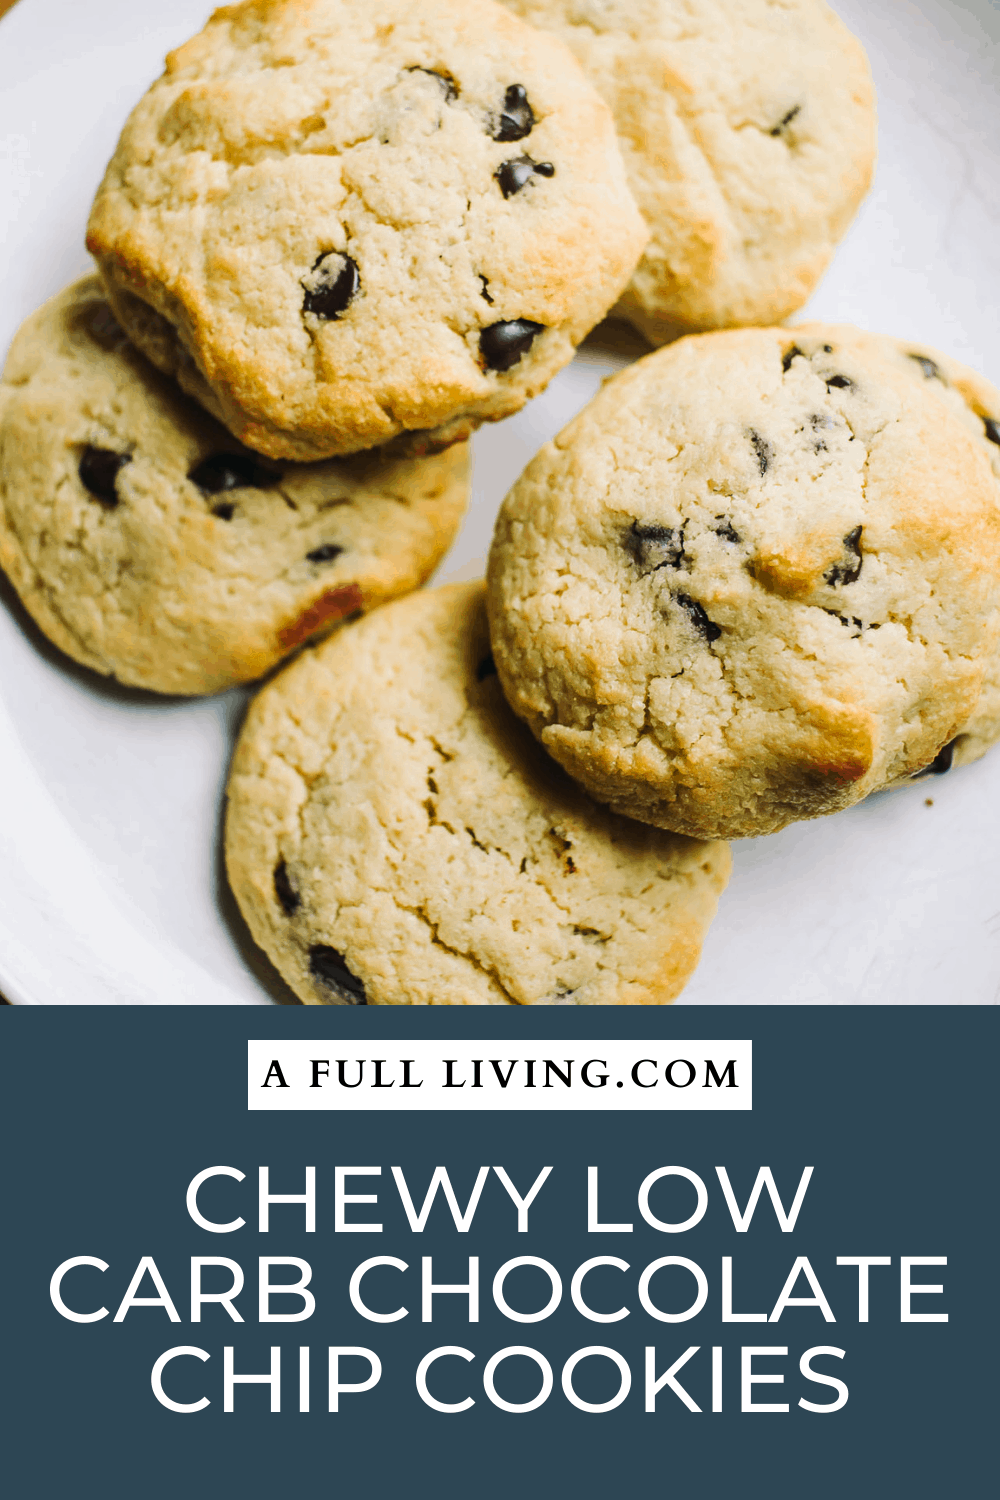 Chewy Low Carb Chocolate Chip Cookies